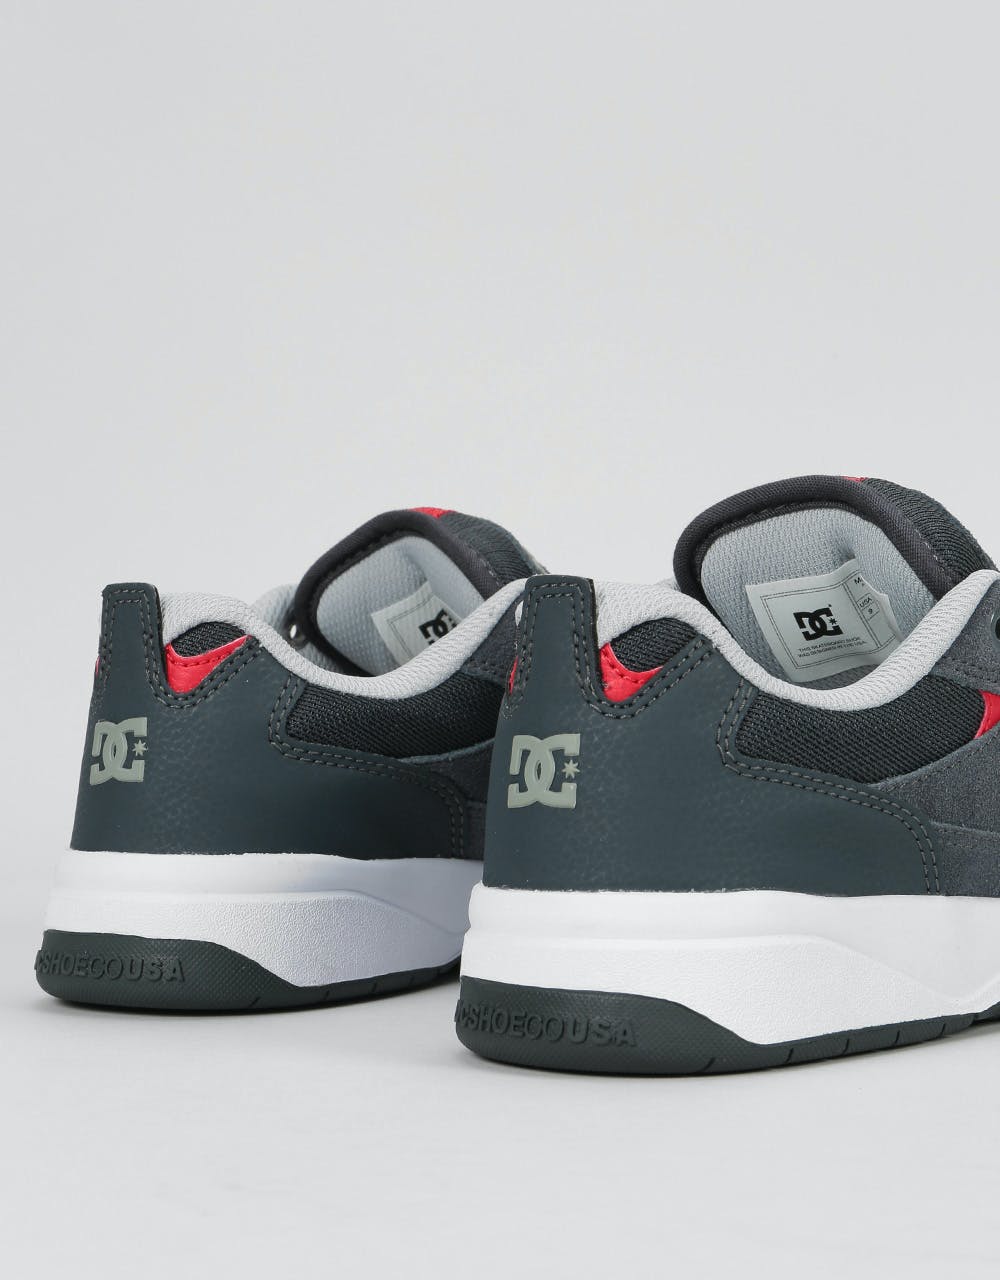 DC Penza Skate Shoes - Grey/Grey/Red